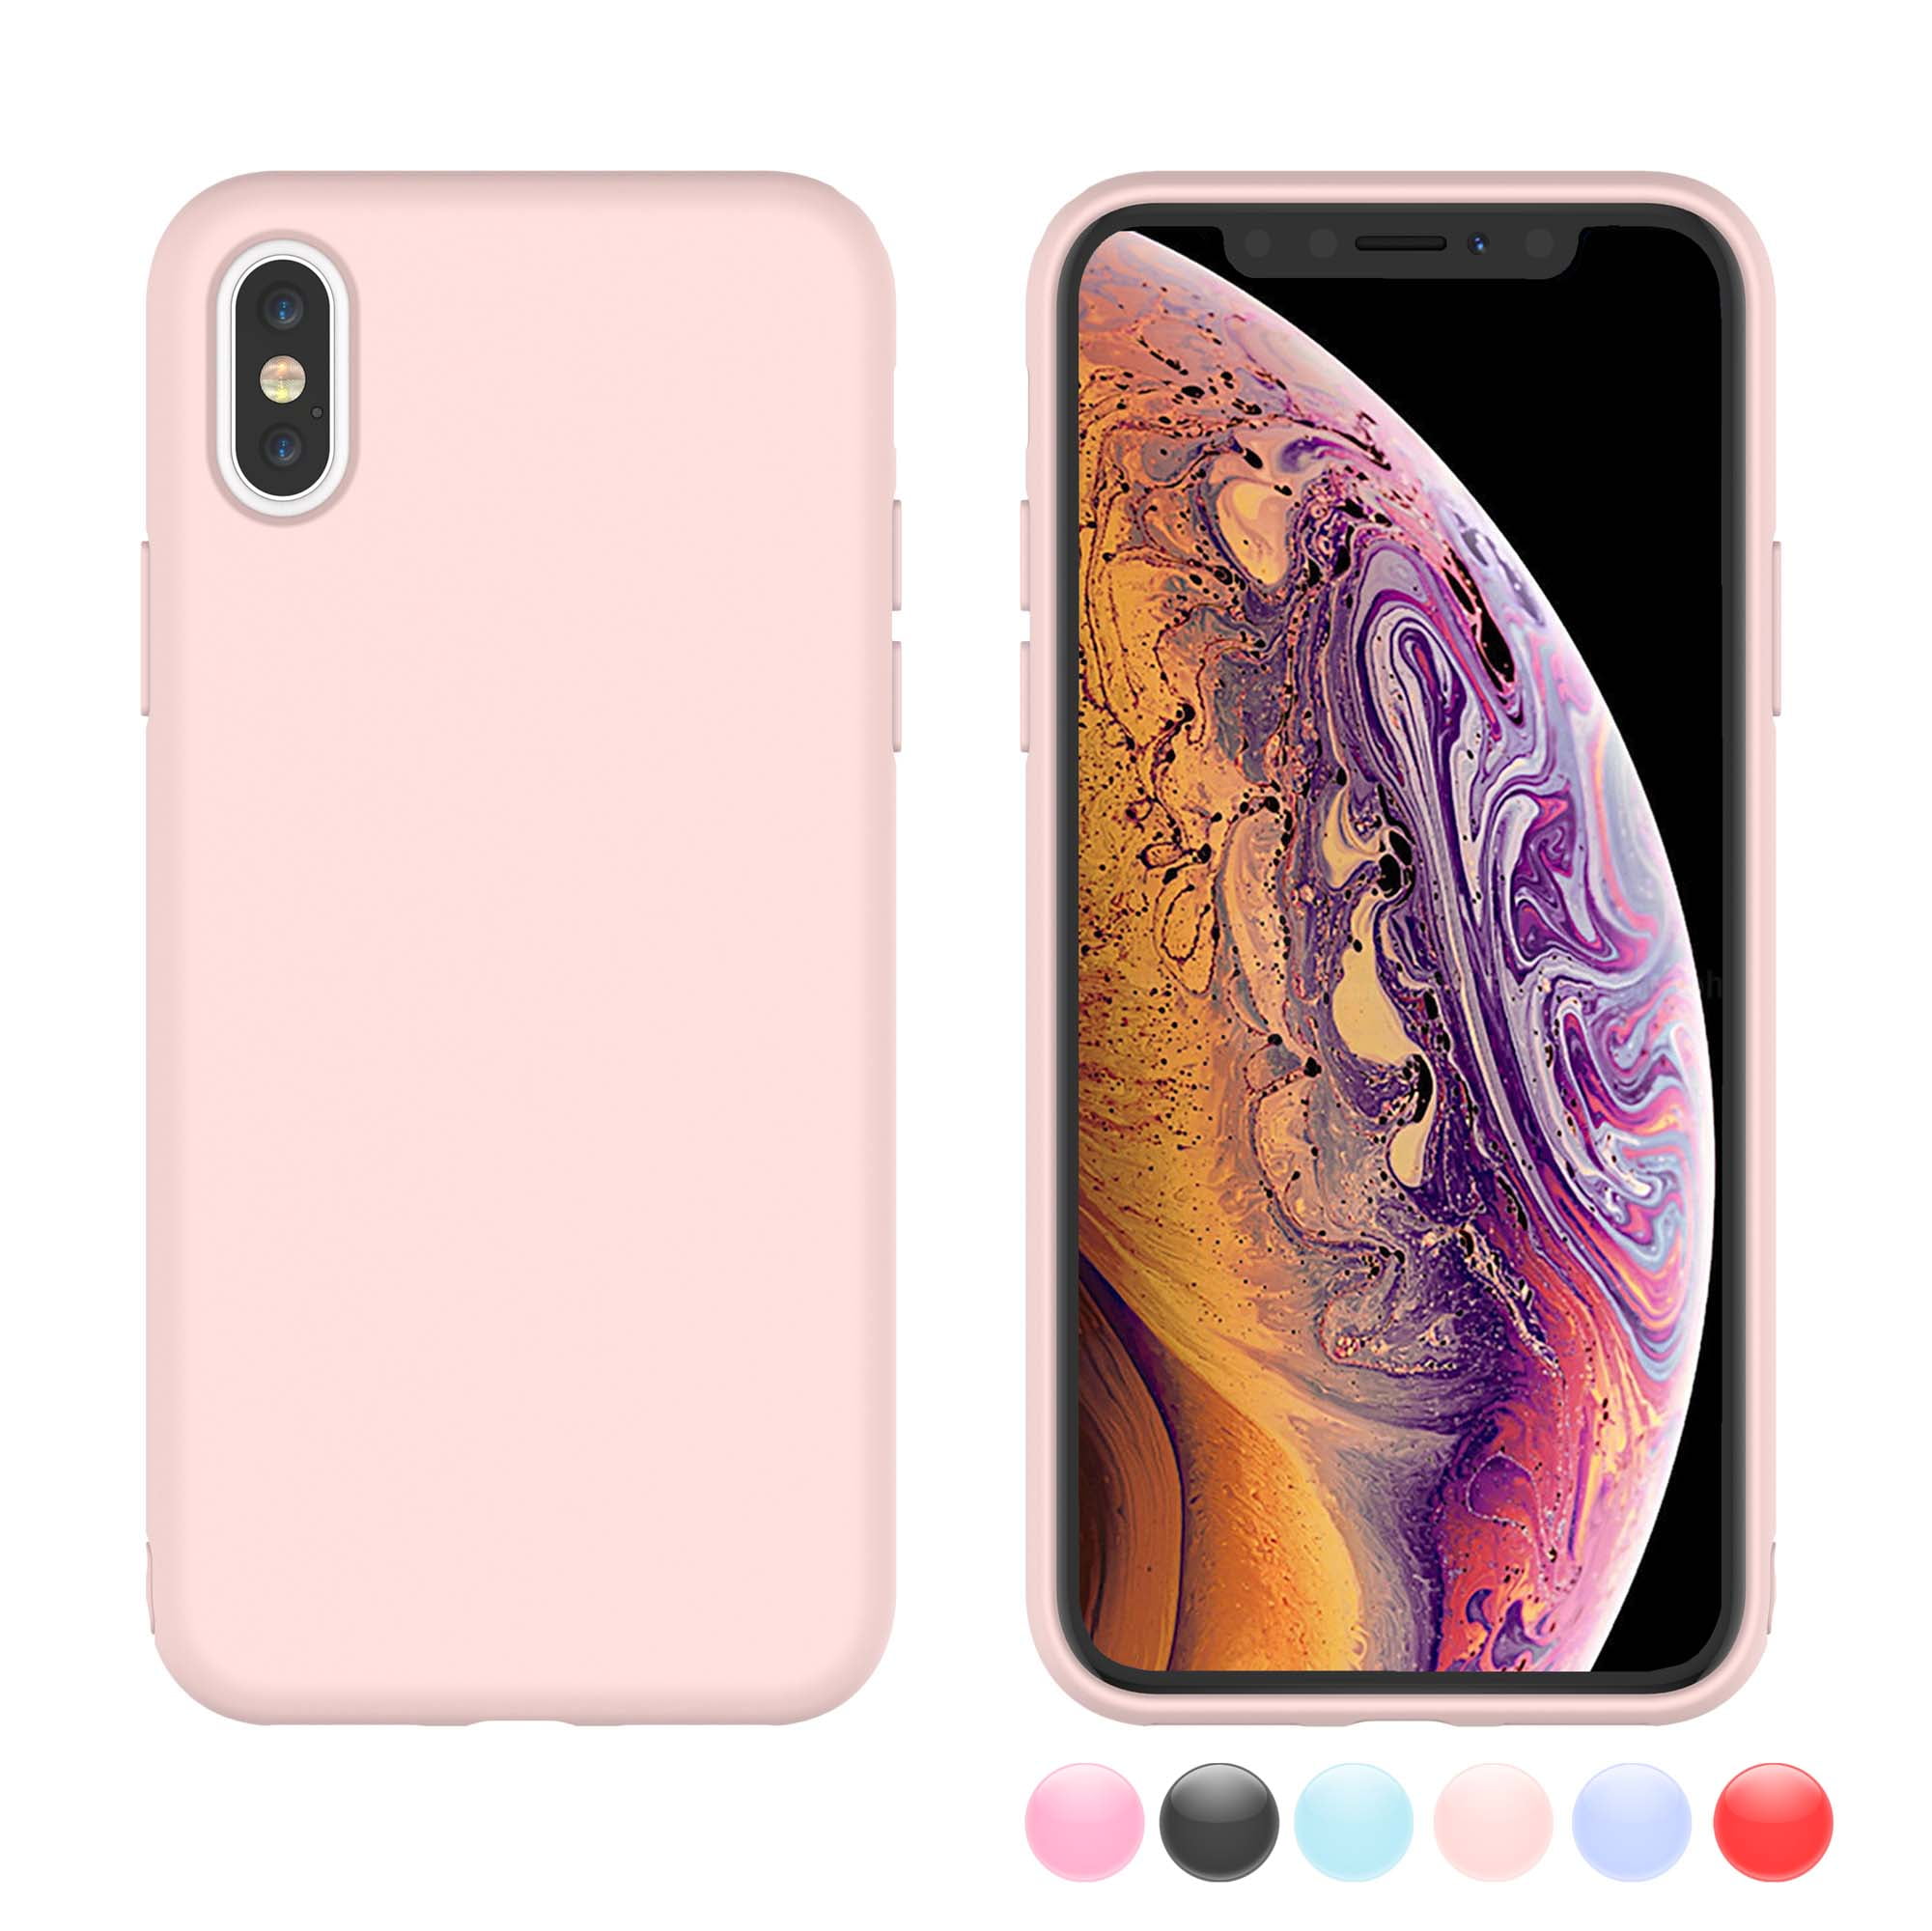 Njjex Case Cover For Apple Iphone Xr Iphone Xs Max Iphone Xs Iphone X Iphone 10 Iphone X Edition Njjex Matte Charming Colorful Slim Soft Tpu Bumper